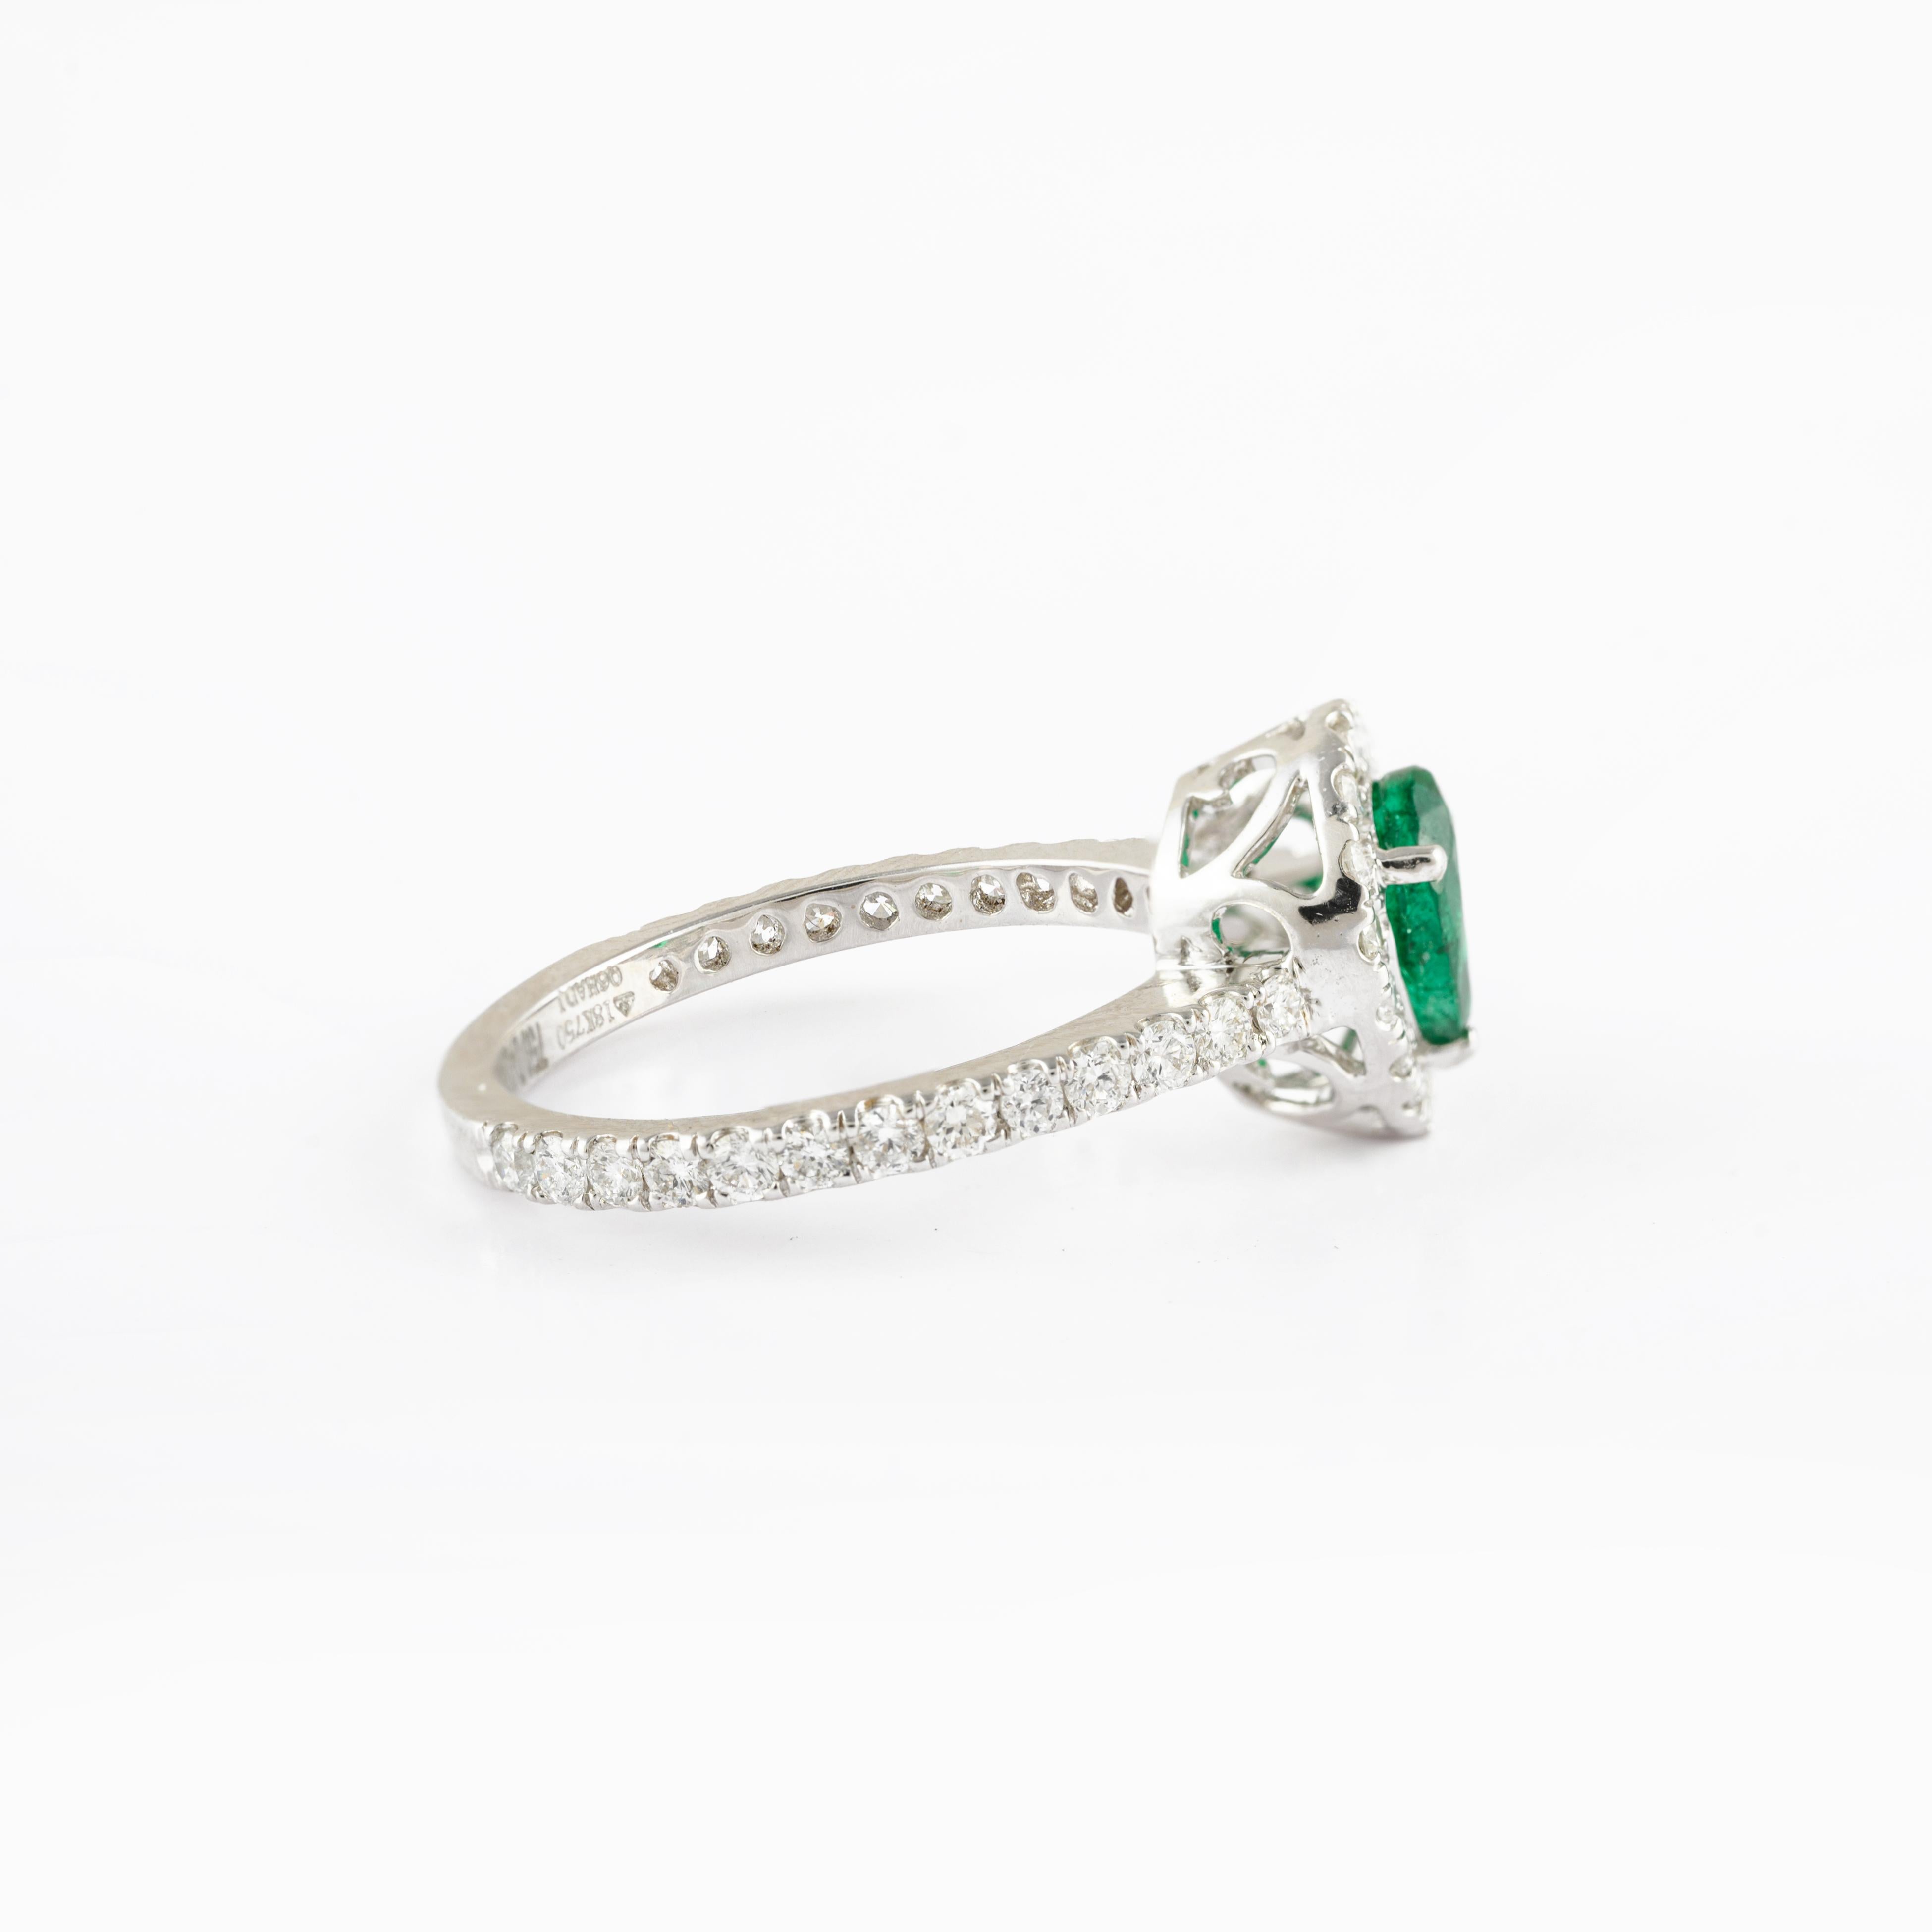 For Sale:  Exclusive 18k Solid White Gold Halo Diamond Natural Pear Cut Emerald Ring 3